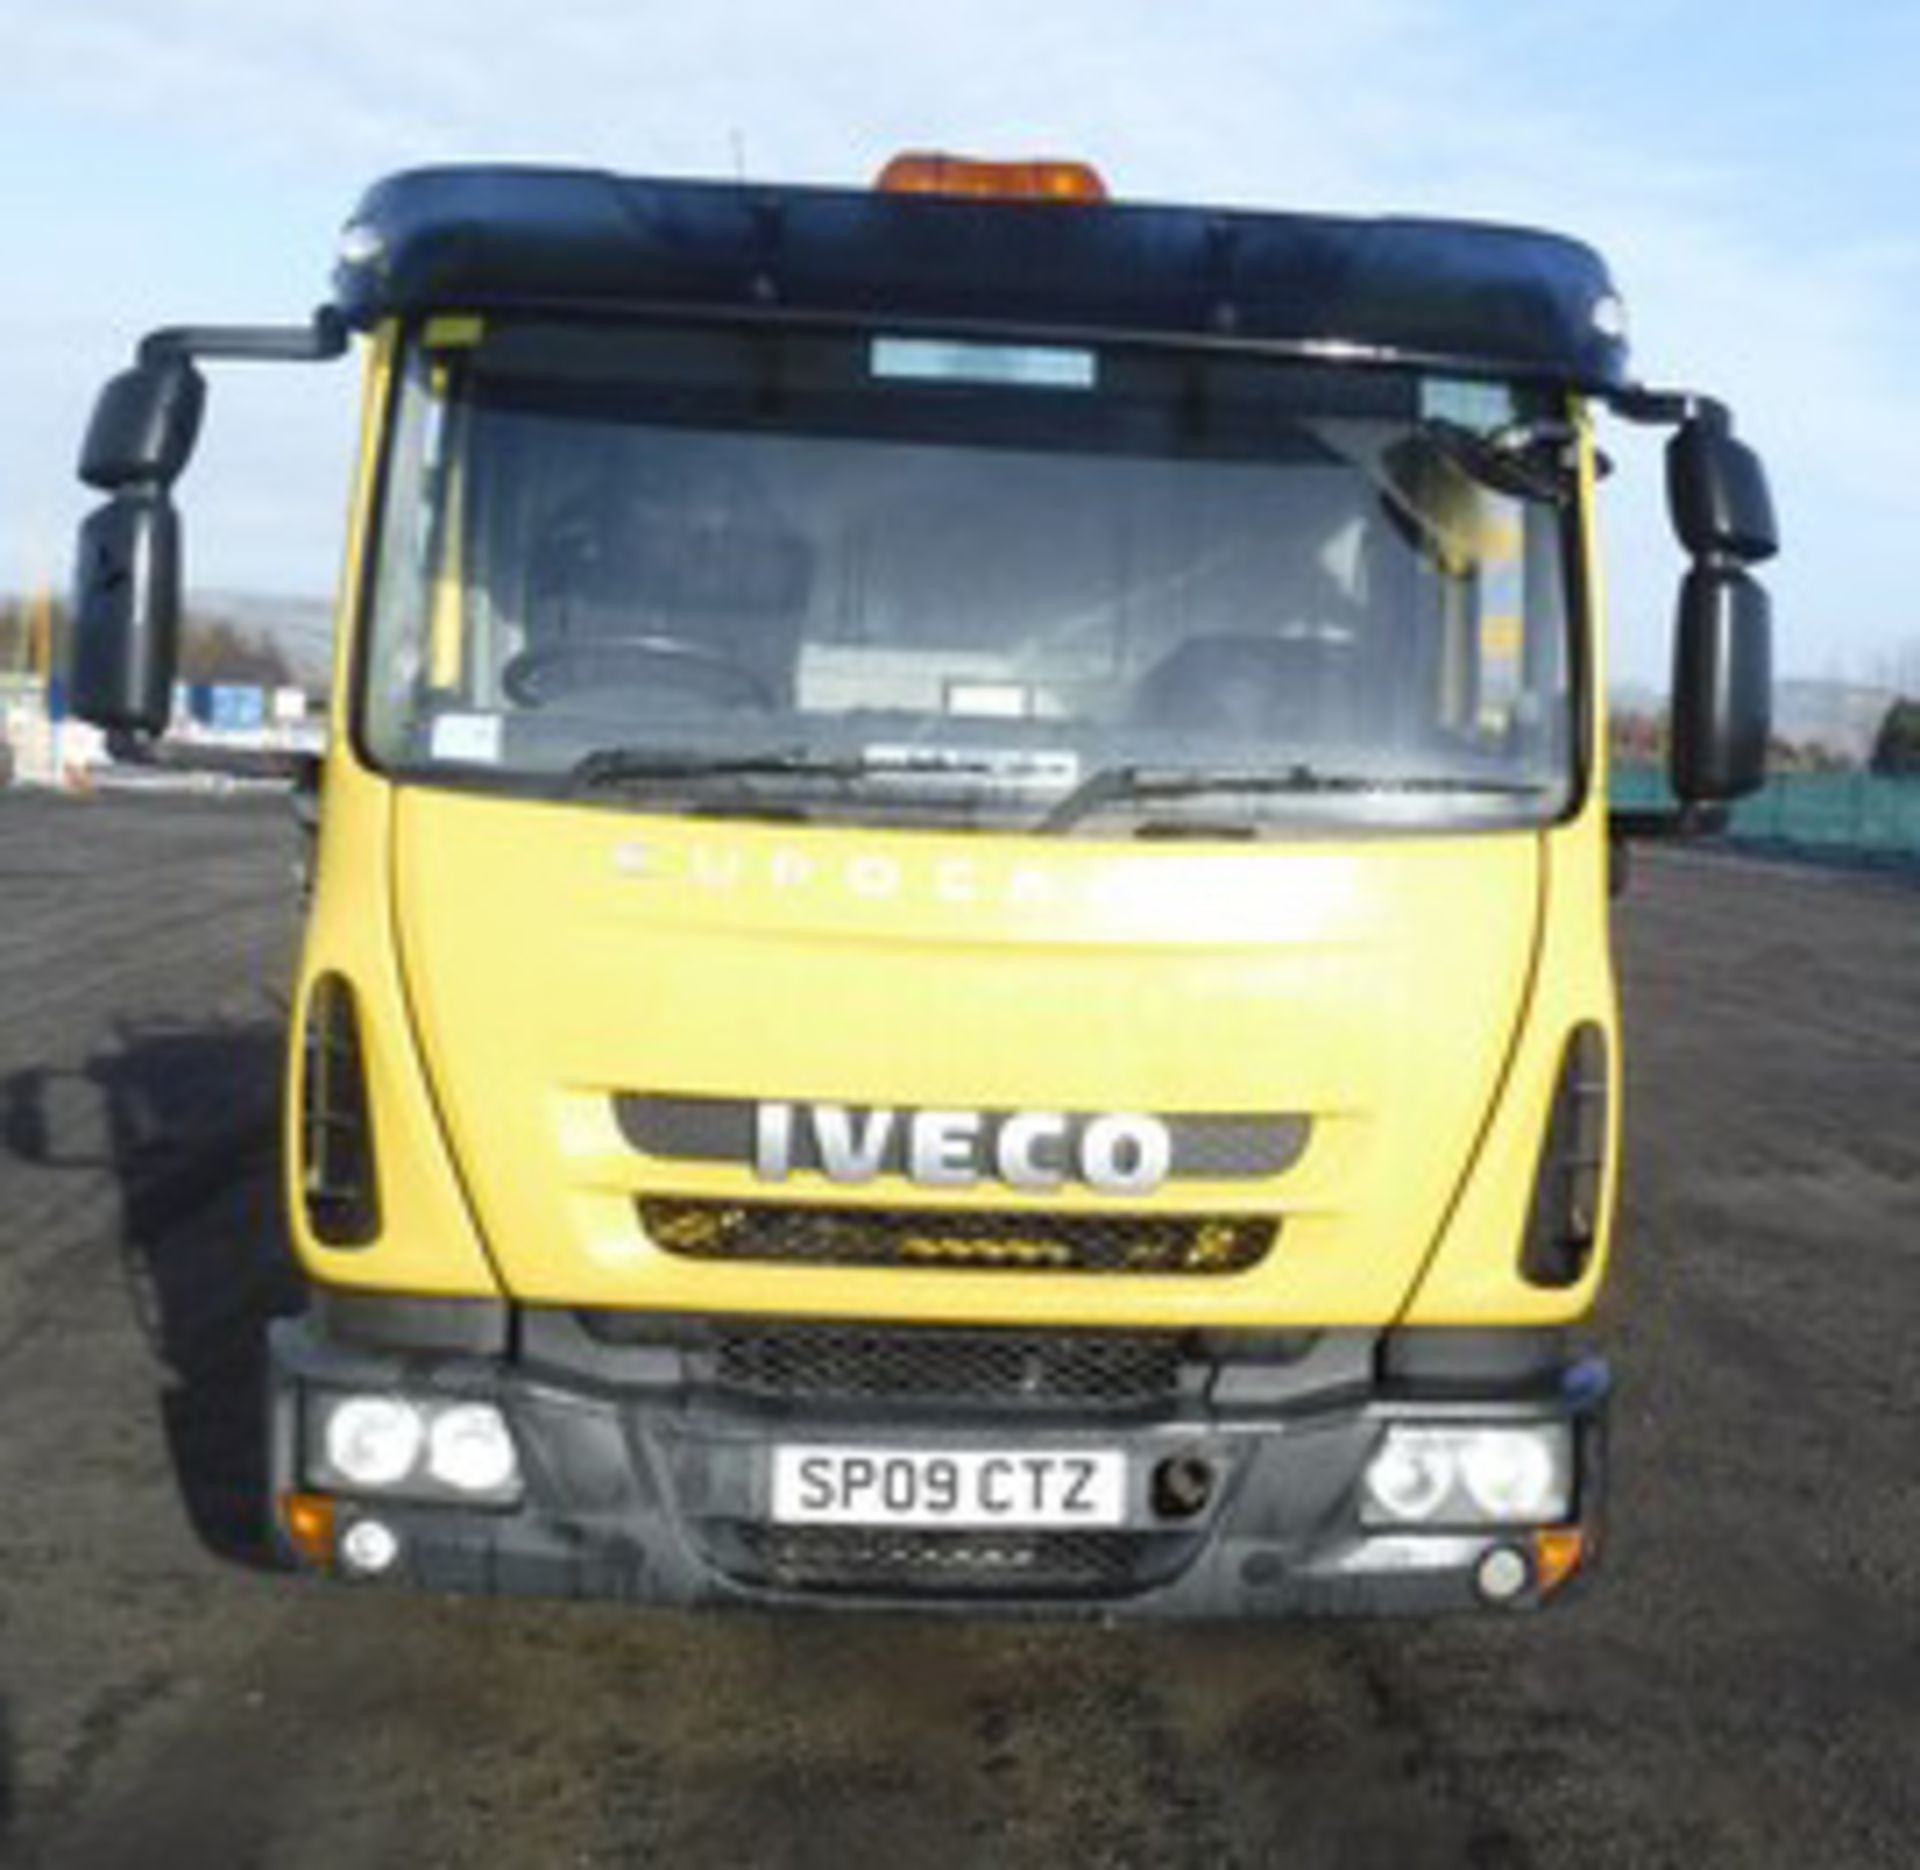 IVECO MODEL EUROCARGO (MY 2008) - 3920cc - Image 13 of 19